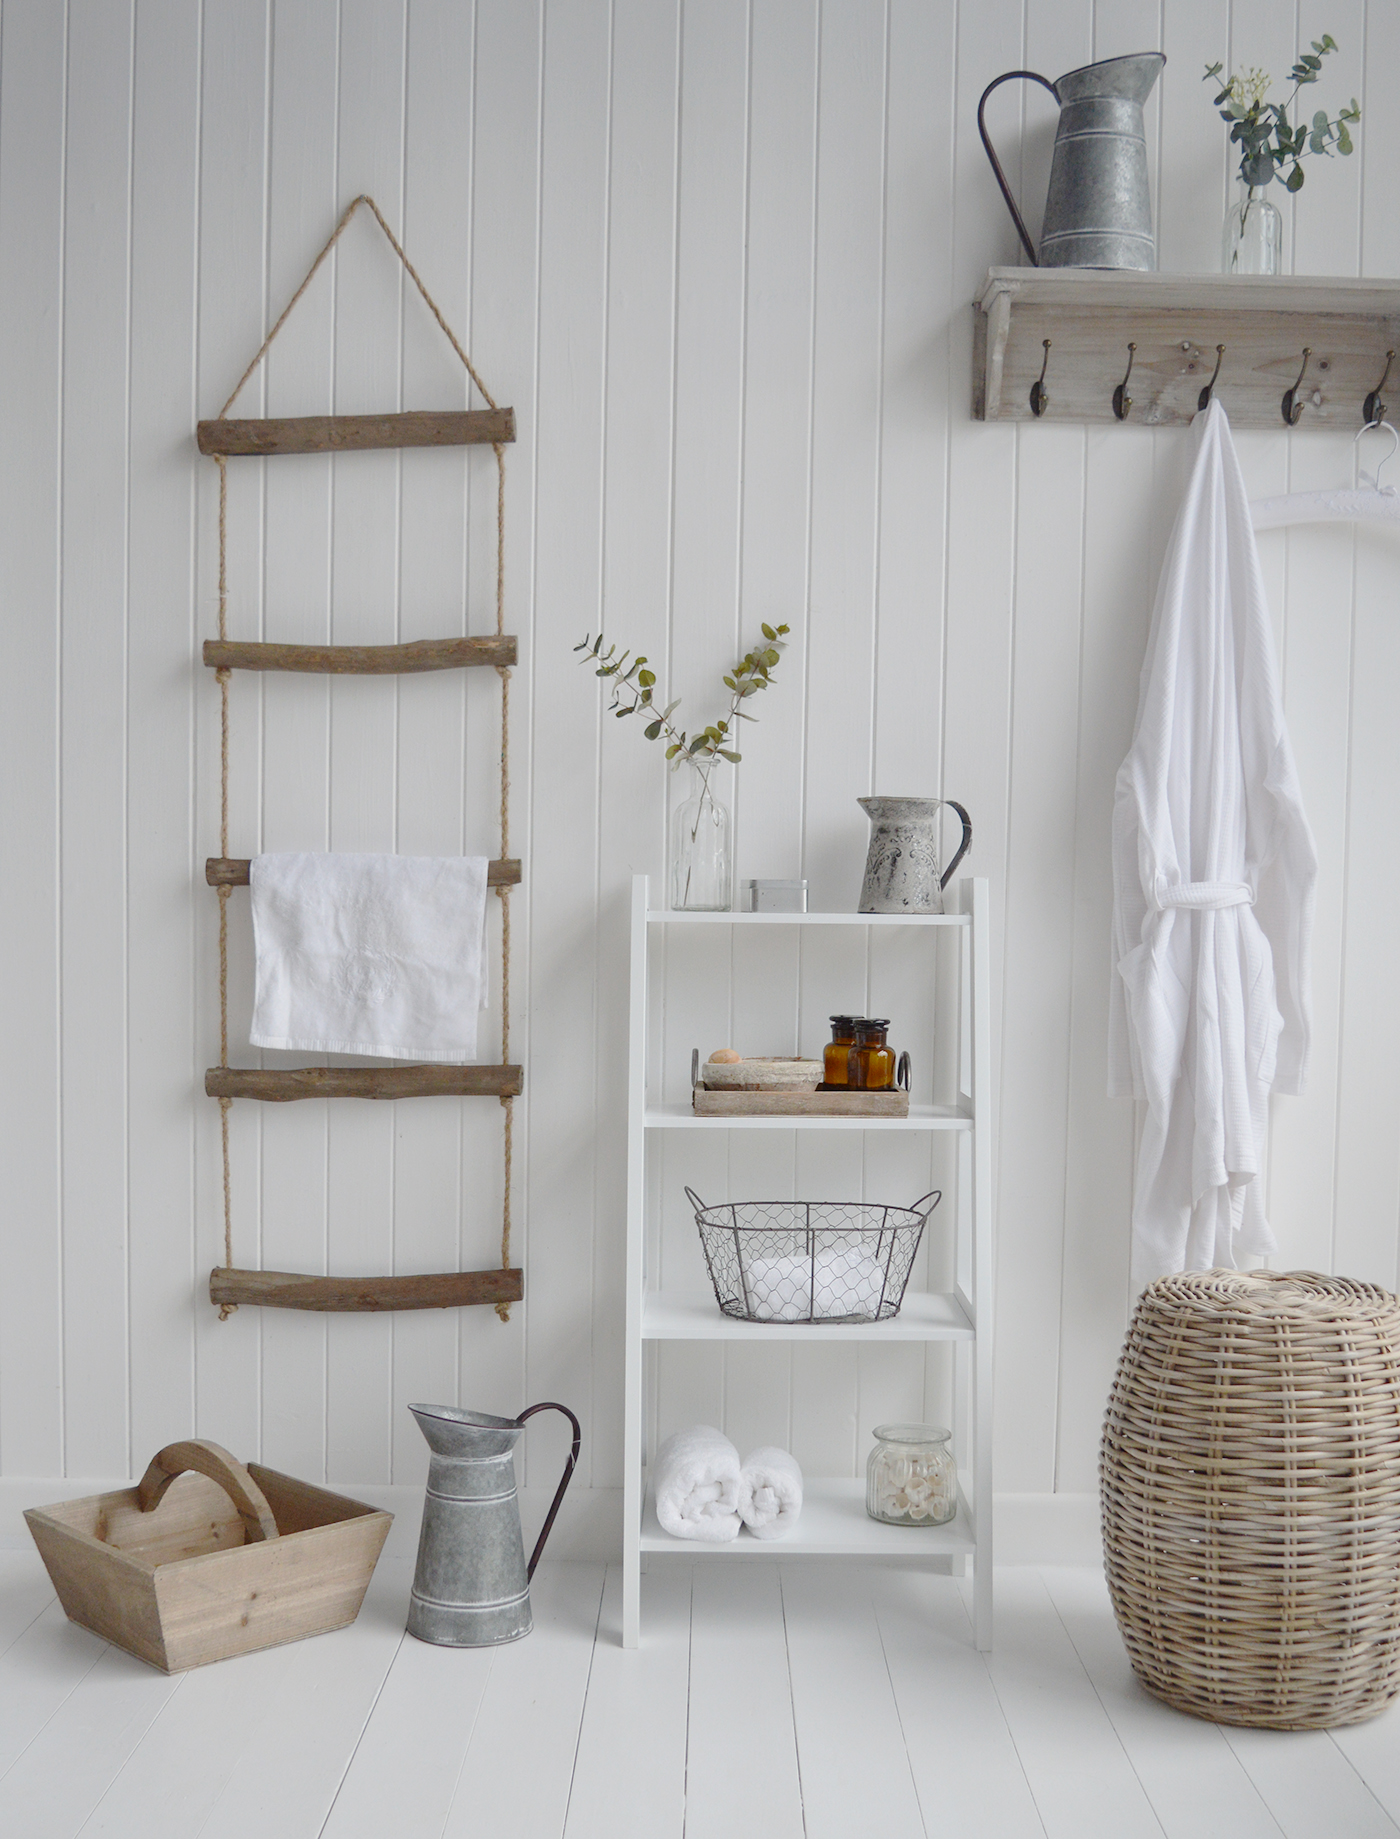 White Patten Shelf Unit for White Bathroom furniture storage in New England coastal, country and modern farmhouse styled interiors